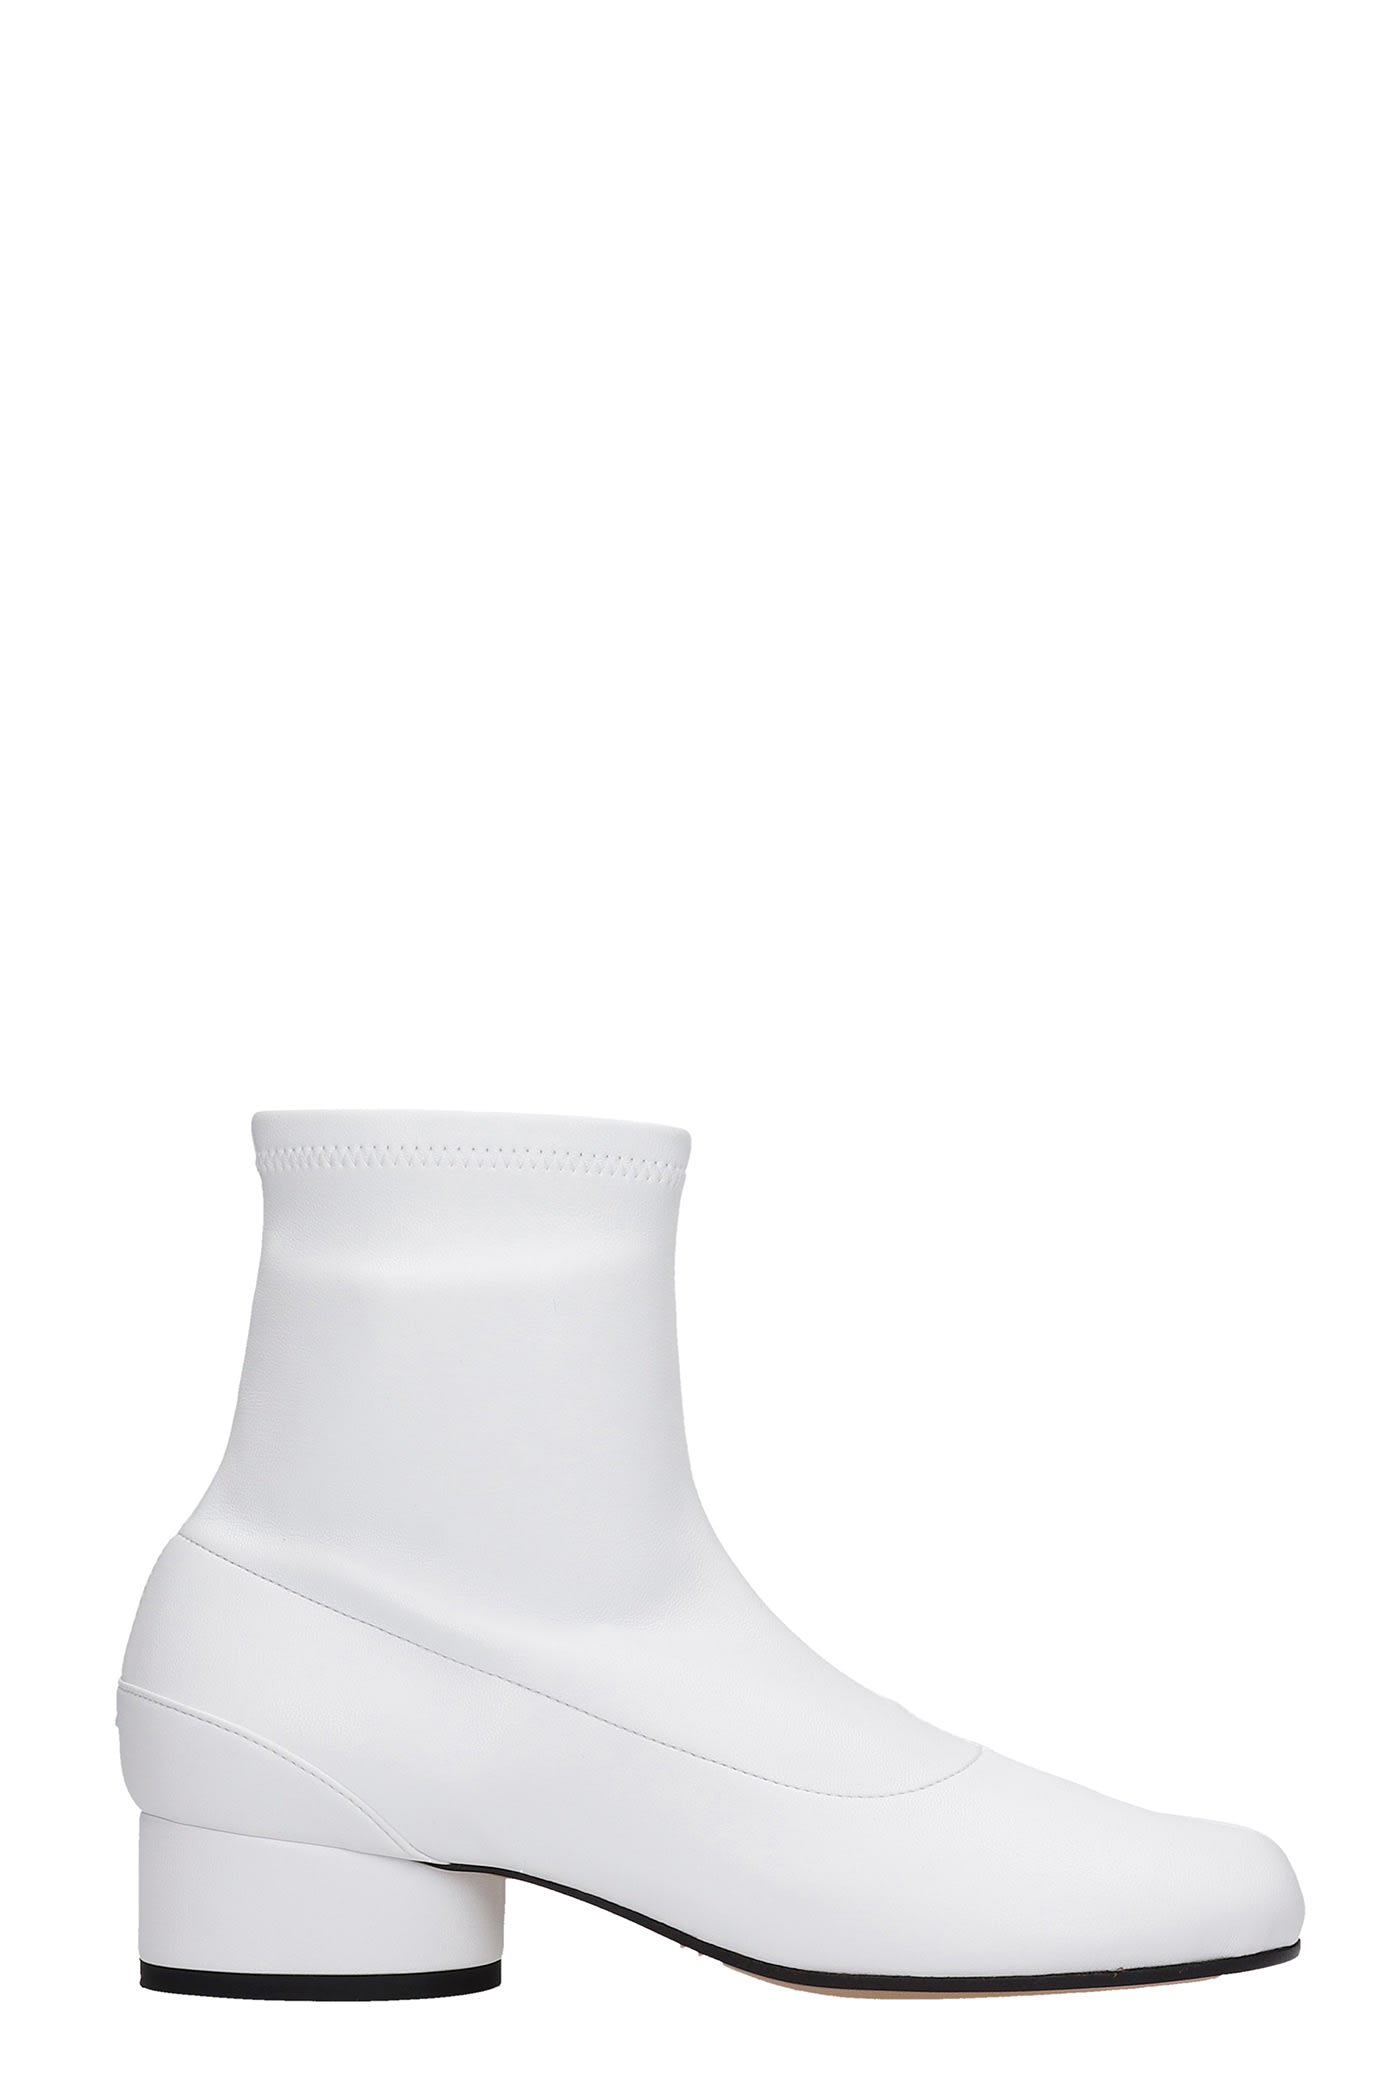 Maison Margiela Tabi Low Heels Ankle Boots In White Leather